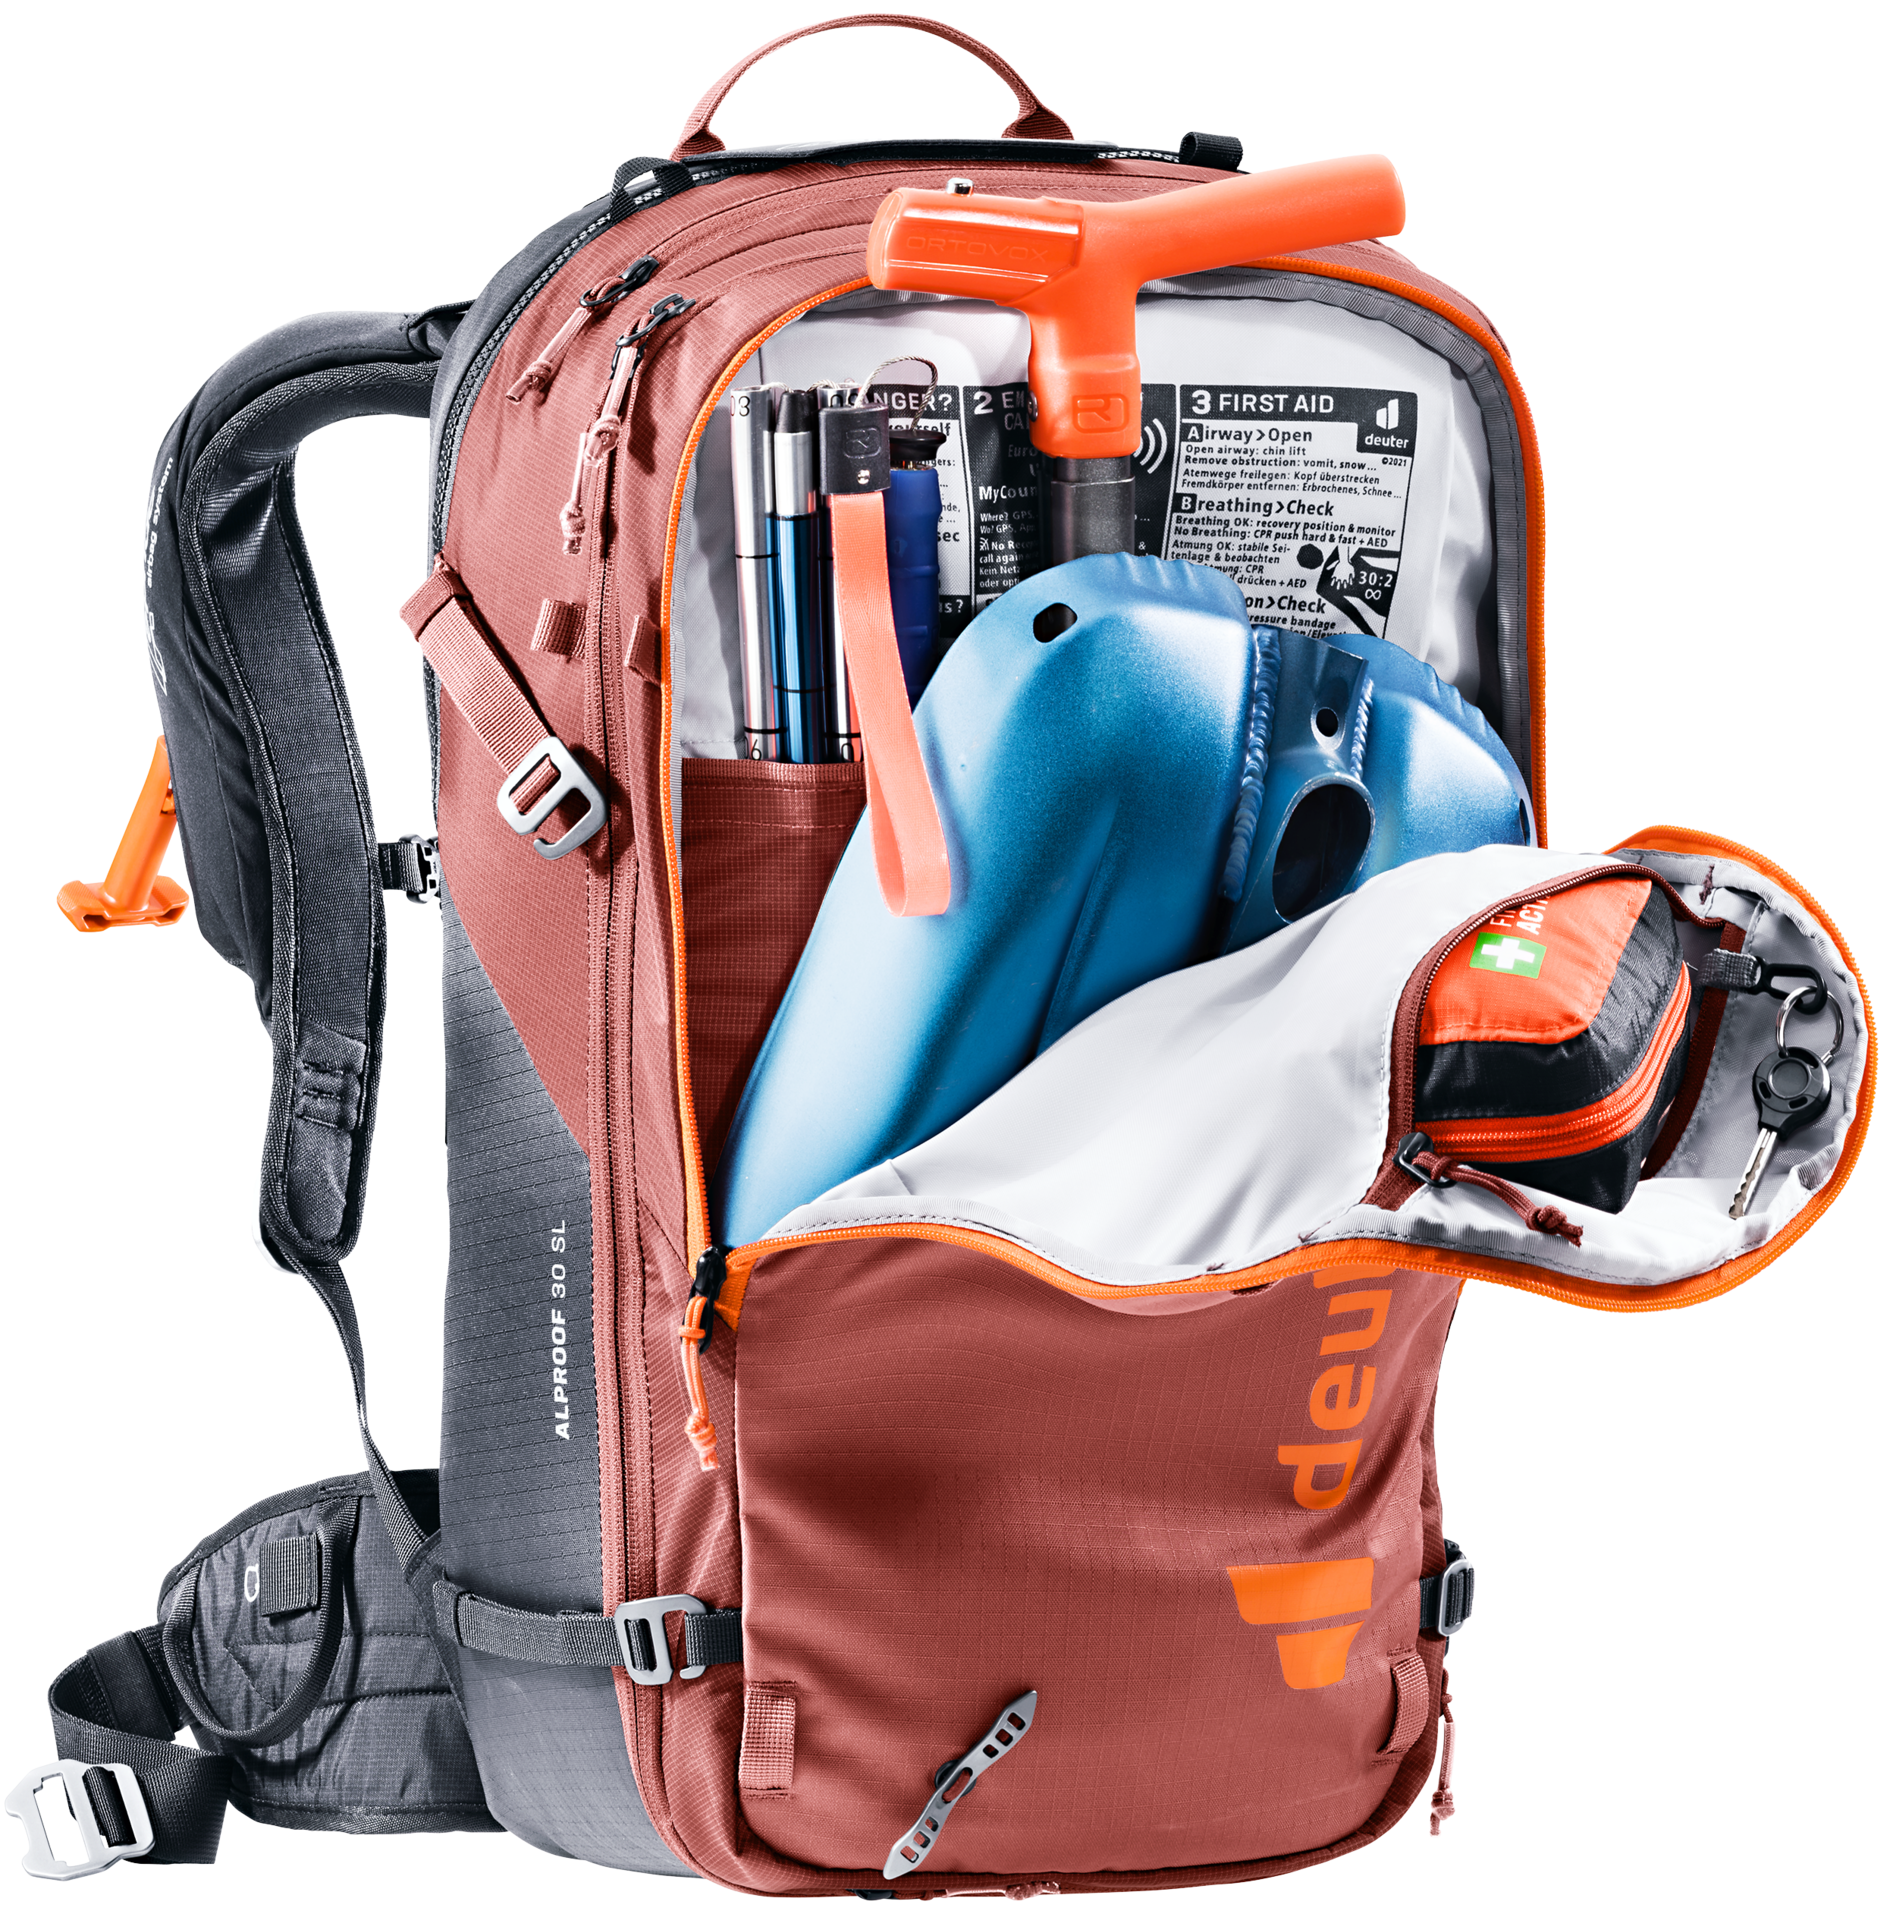 Avalanche Backpack Mammut Light Protection Airbag 3.0 30L - inSPORTline